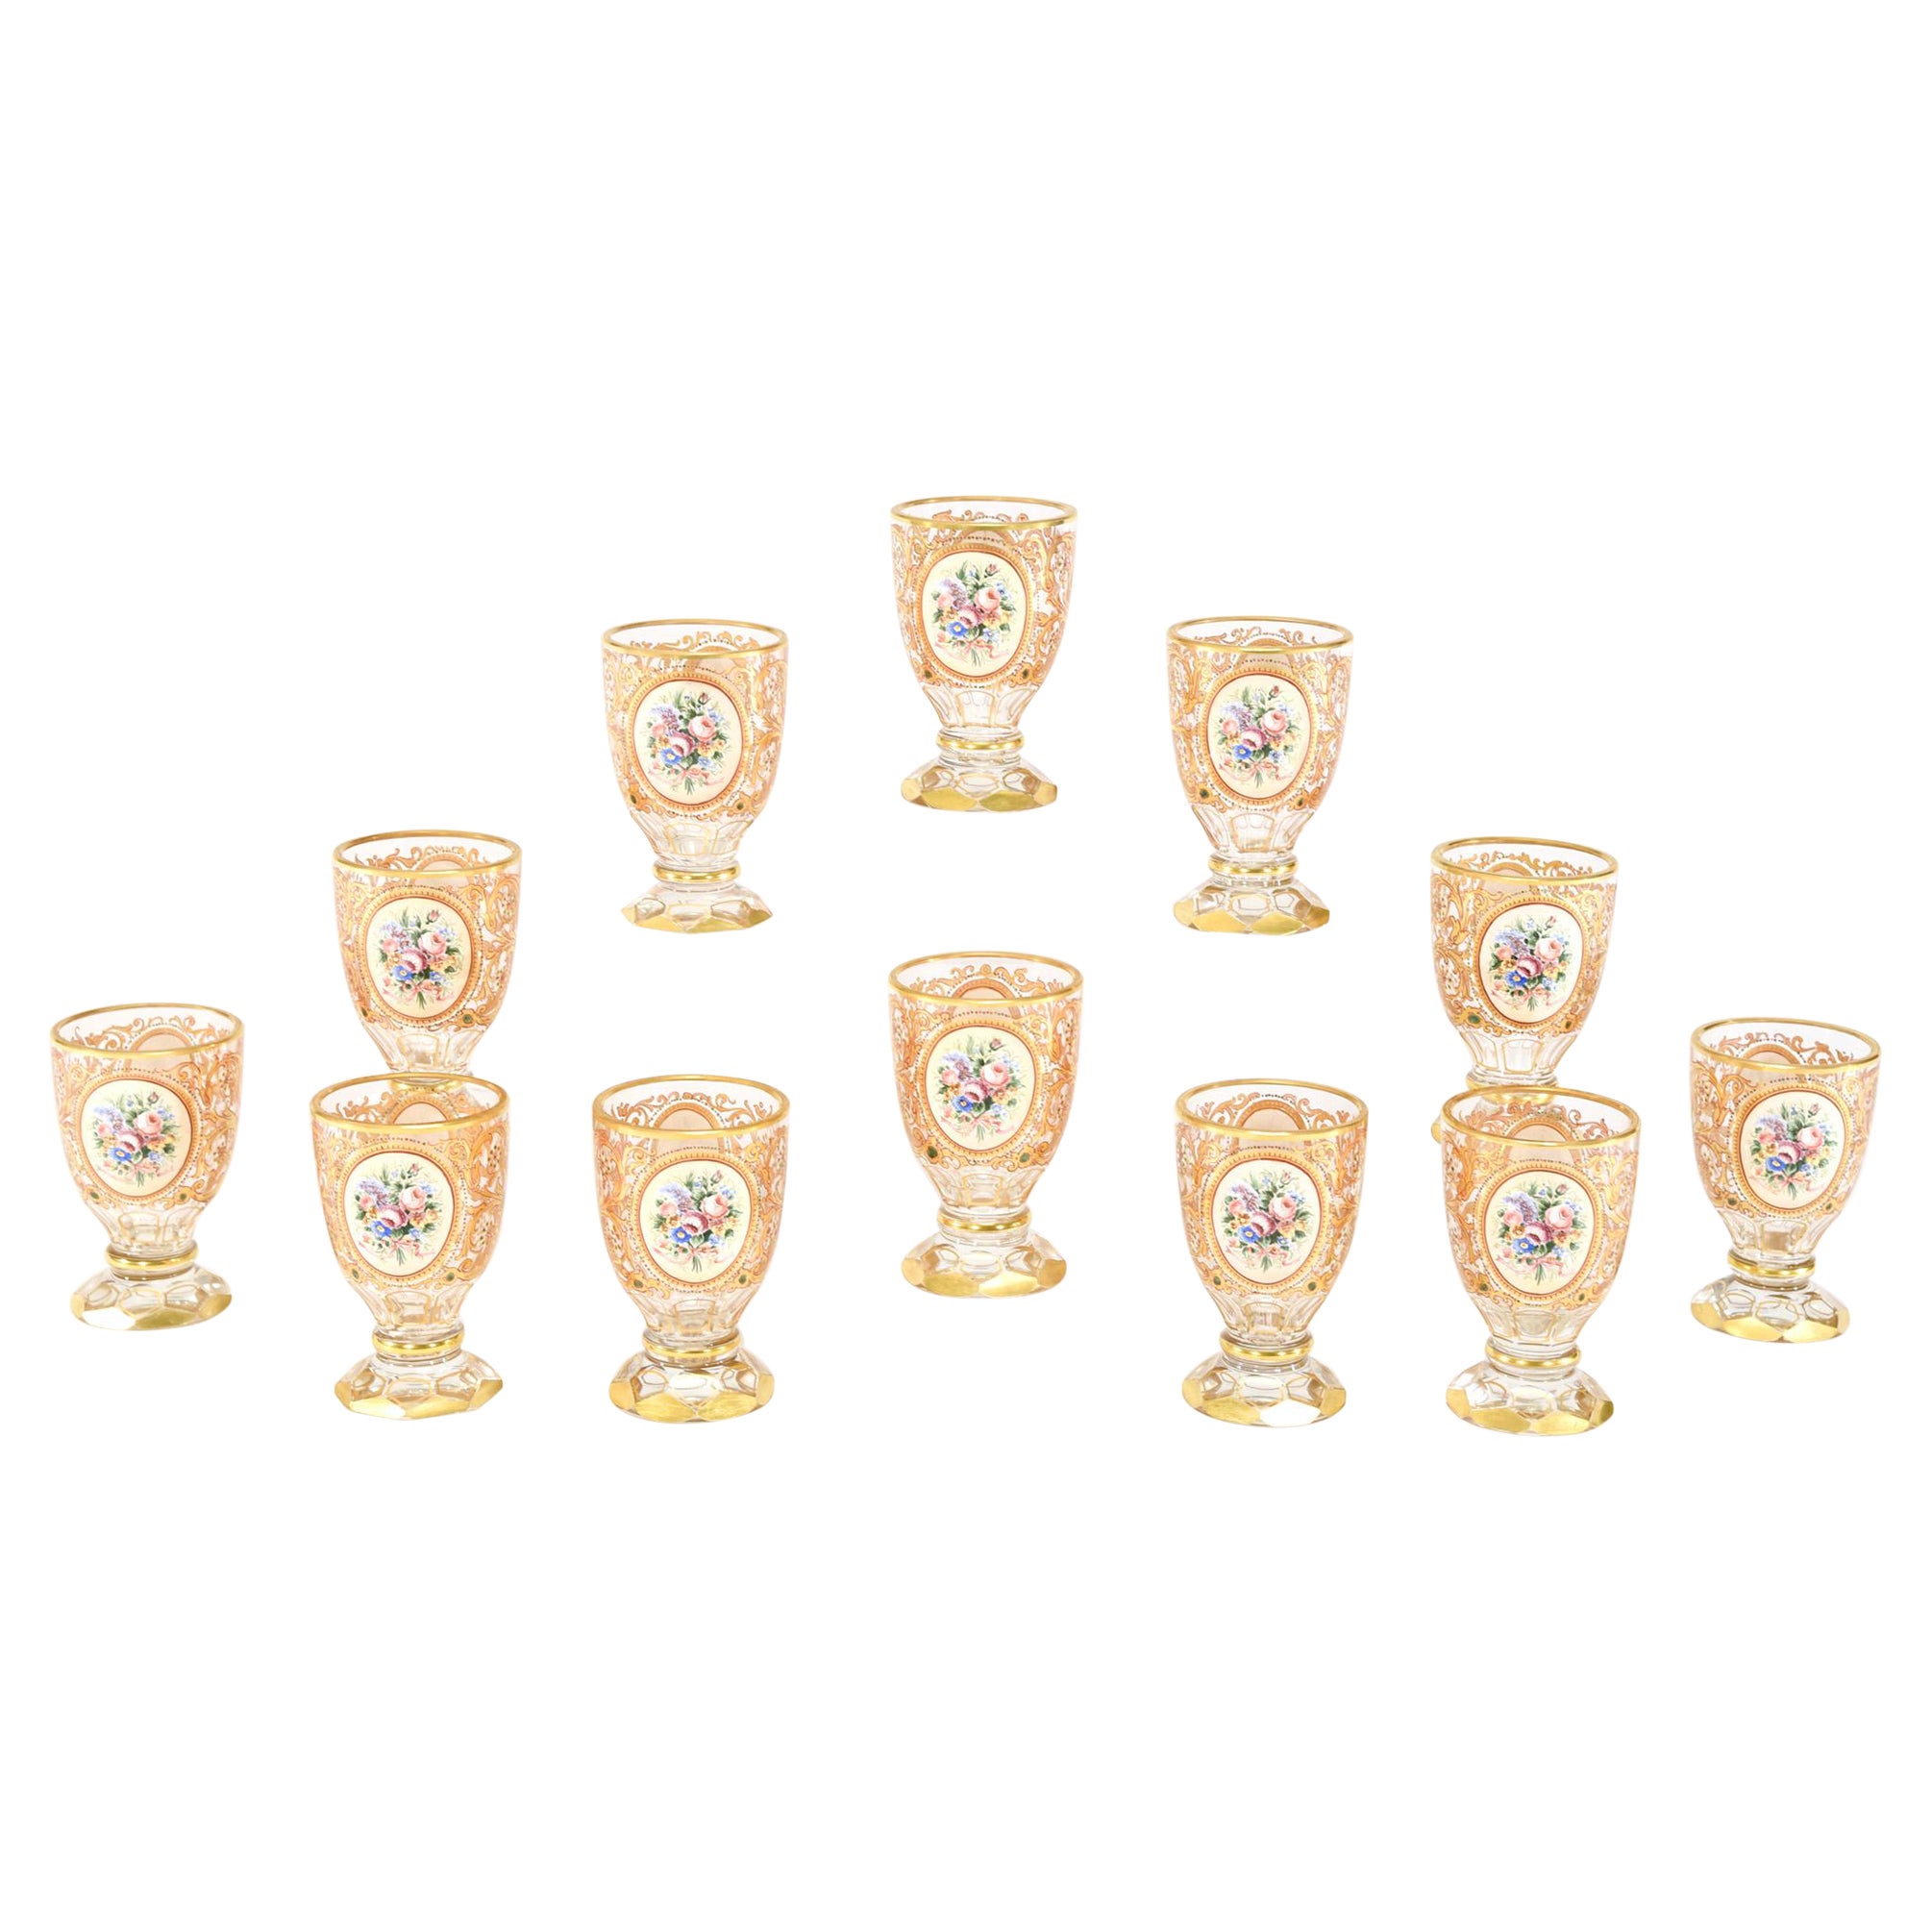 12 Bohemian 19th Century Crystal Tumblers with Polychrome Enamel Reserves Gold